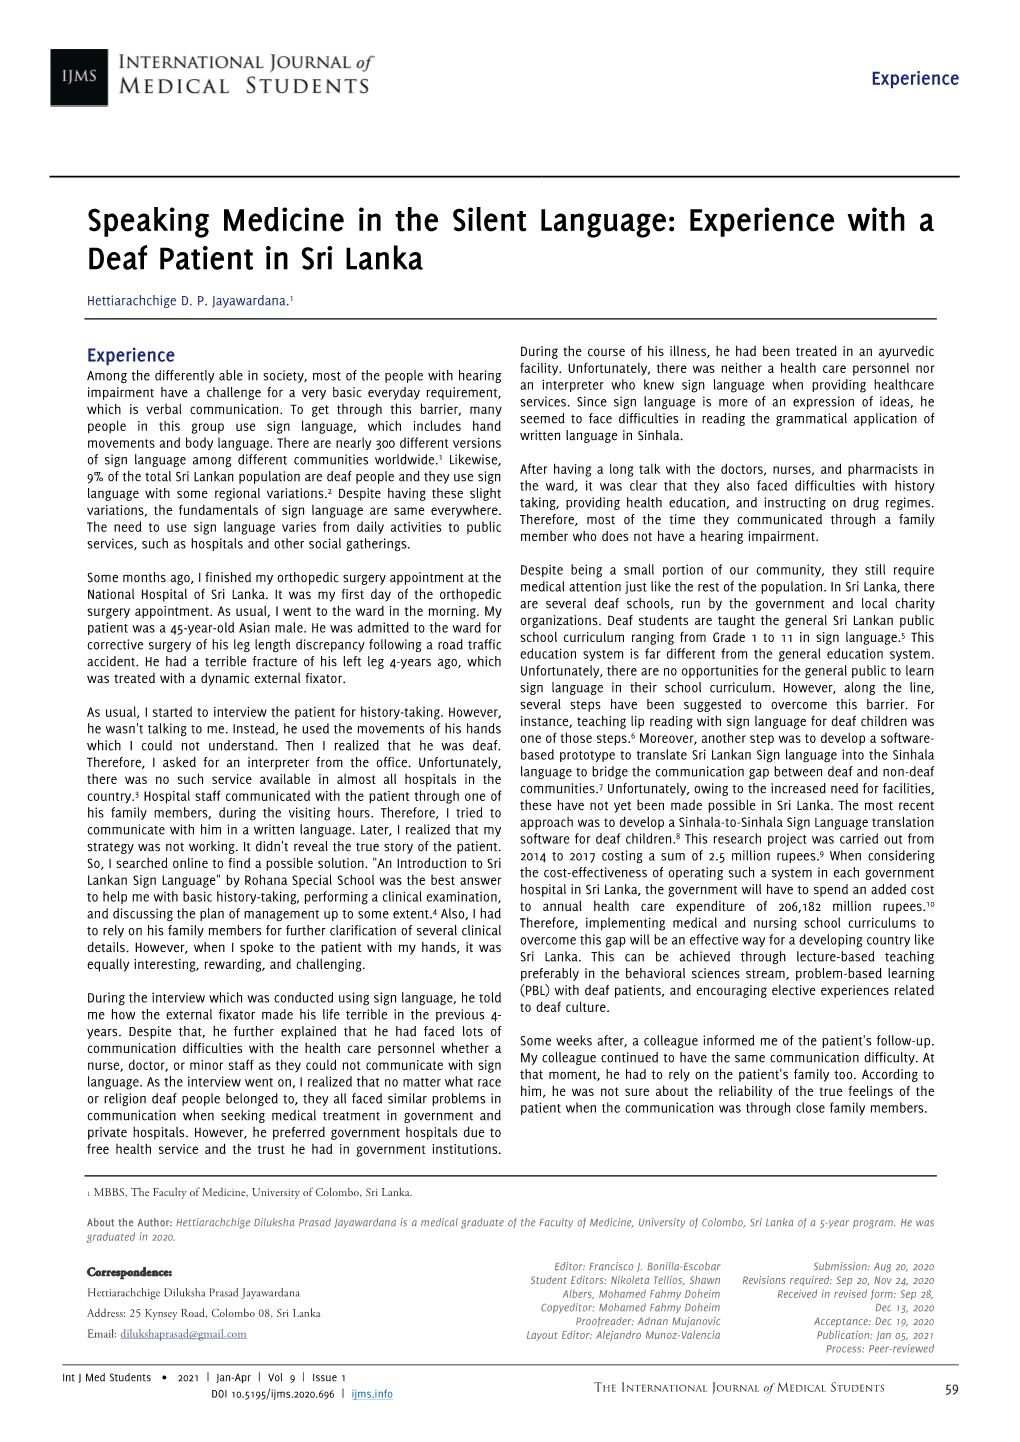 Experience with a Deaf Patient in Sri Lanka